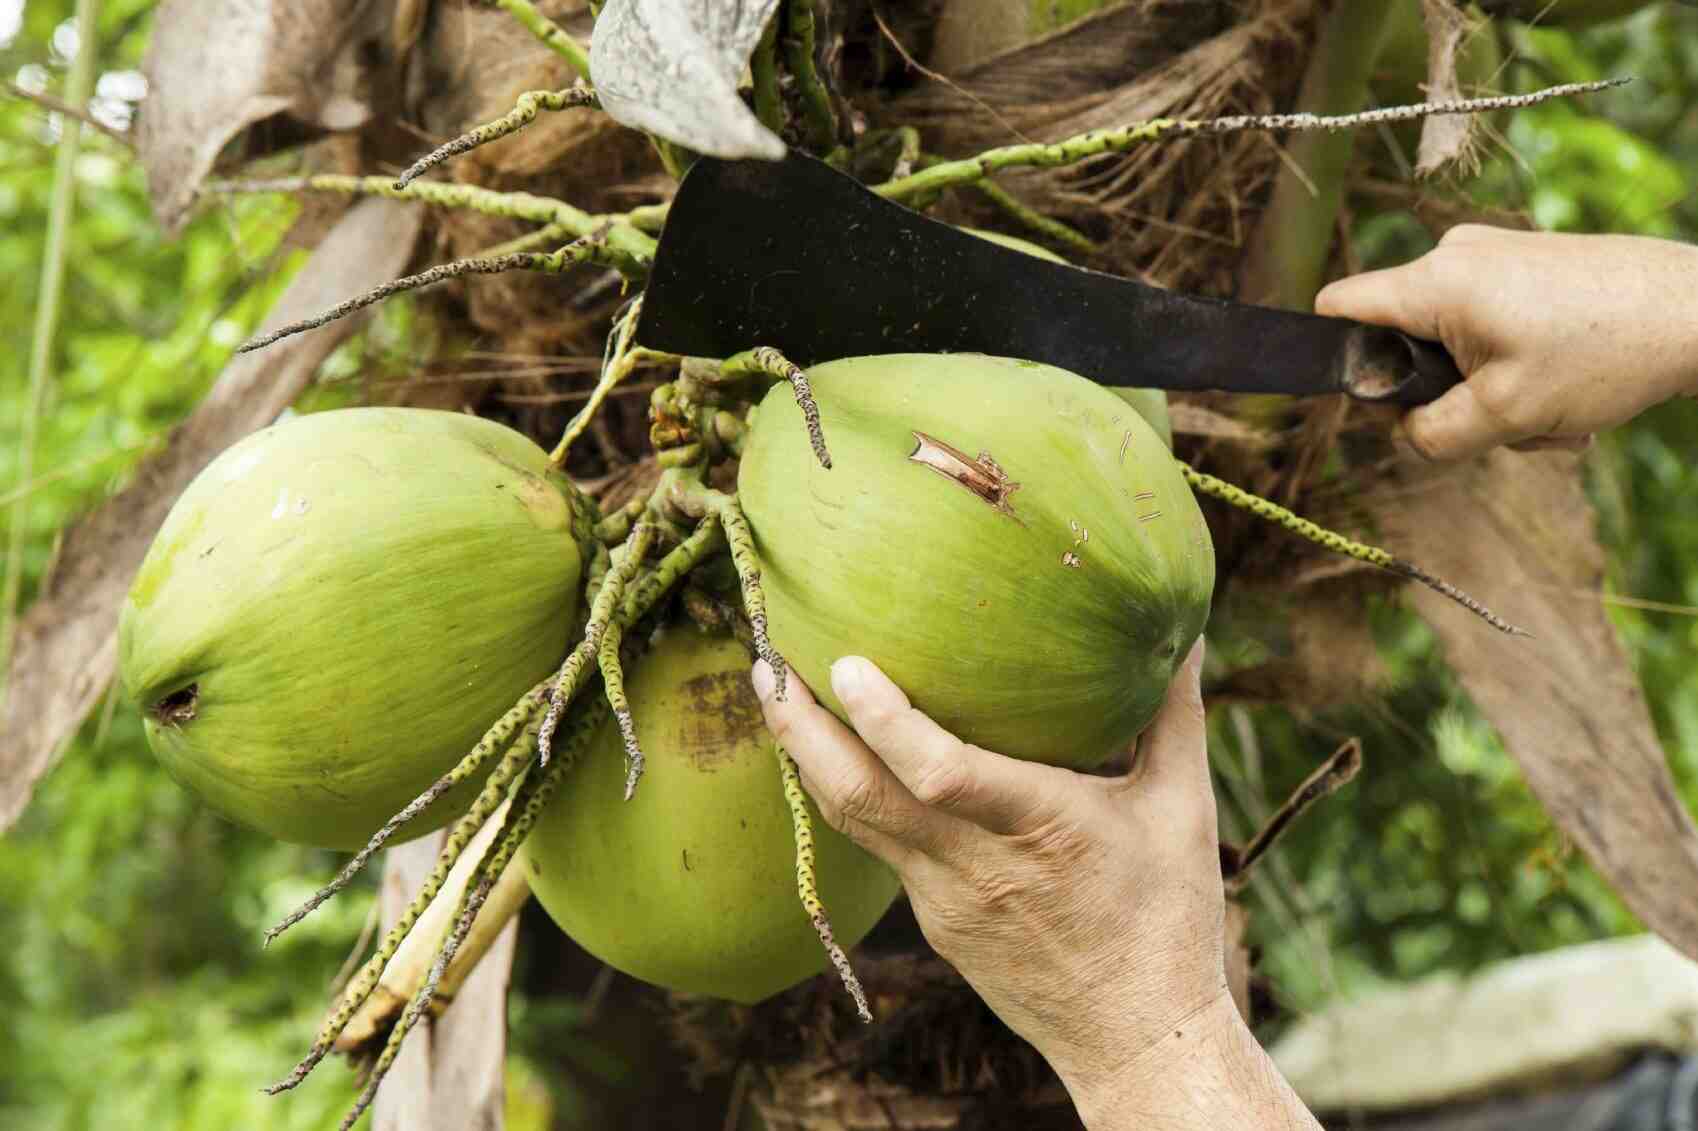 How do you get a coconut out of a tree?